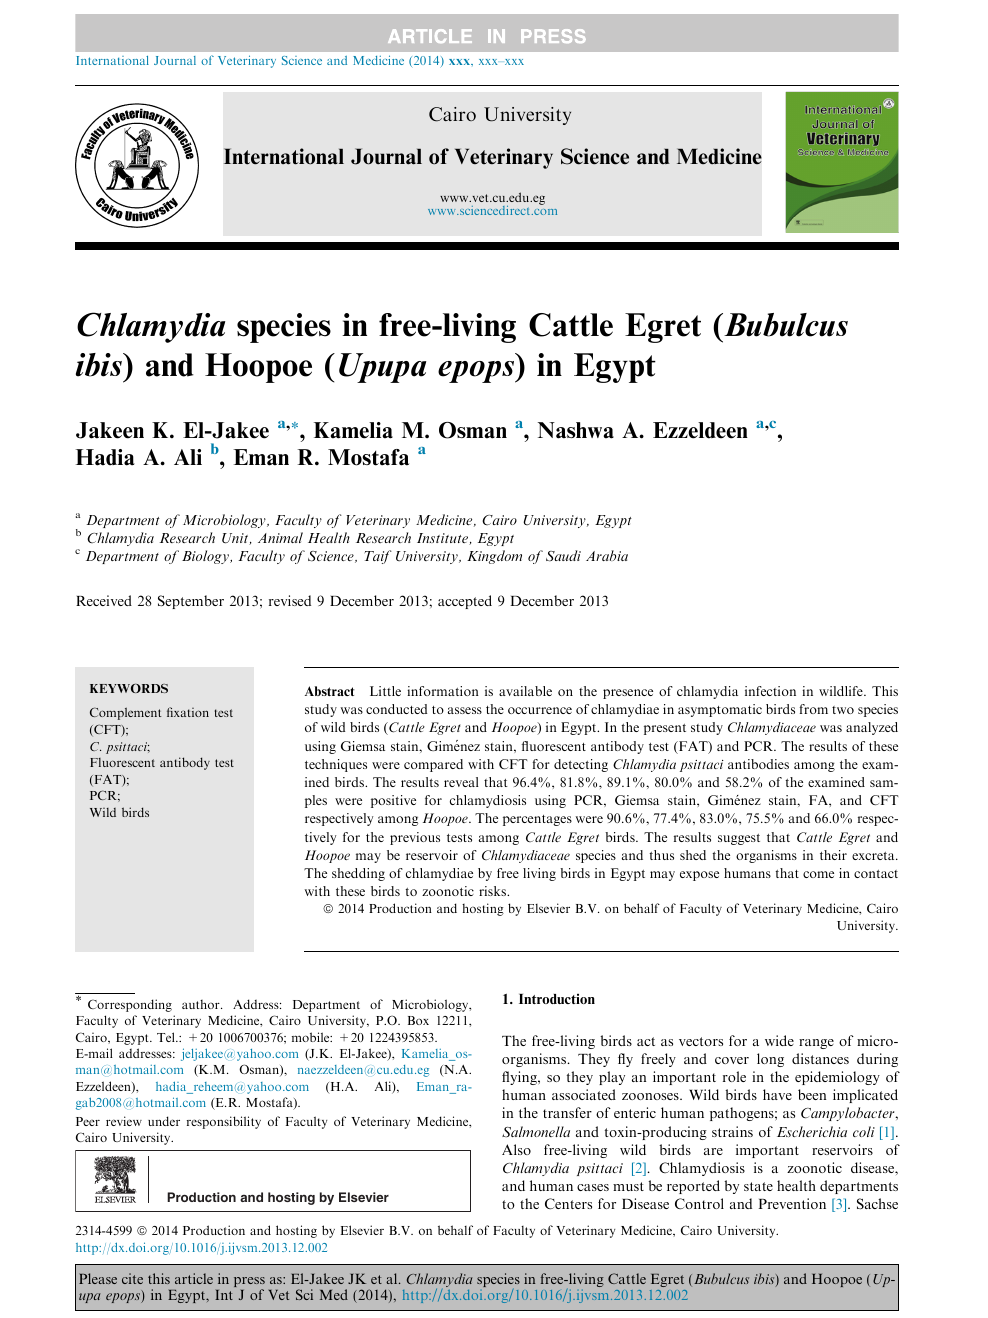 Chlamydia Species In Free Living Cattle Egret Bubulcus Ibis And Hoopoe Upupa Epops In Egypt Topic Of Research Paper In Veterinary Science Download Scholarly Article Pdf And Read For Free On Cyberleninka